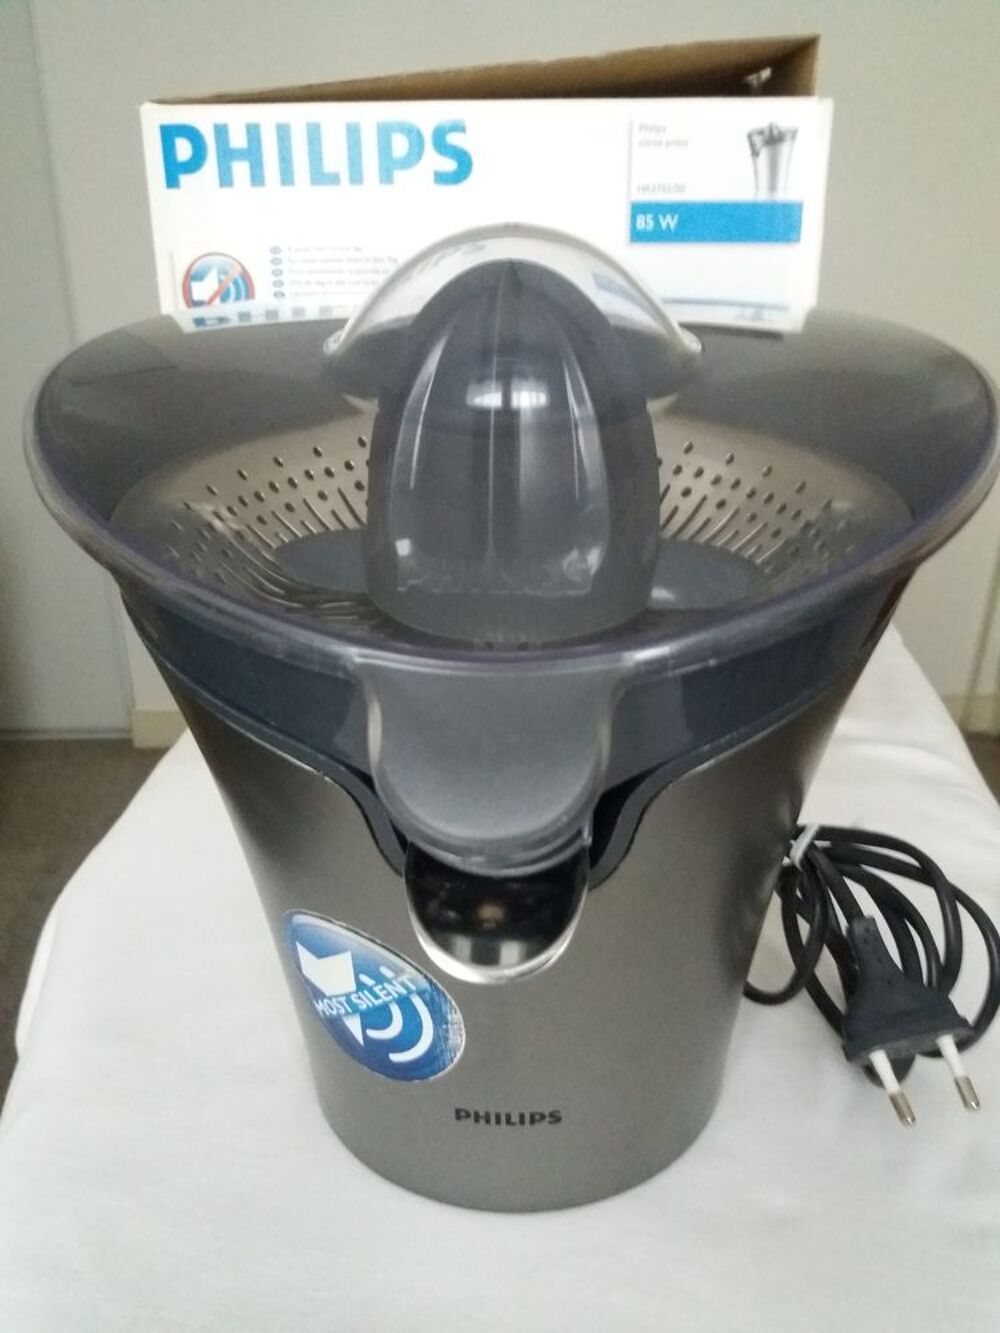 PRESSE AGRUMES PHILIPS Electromnager